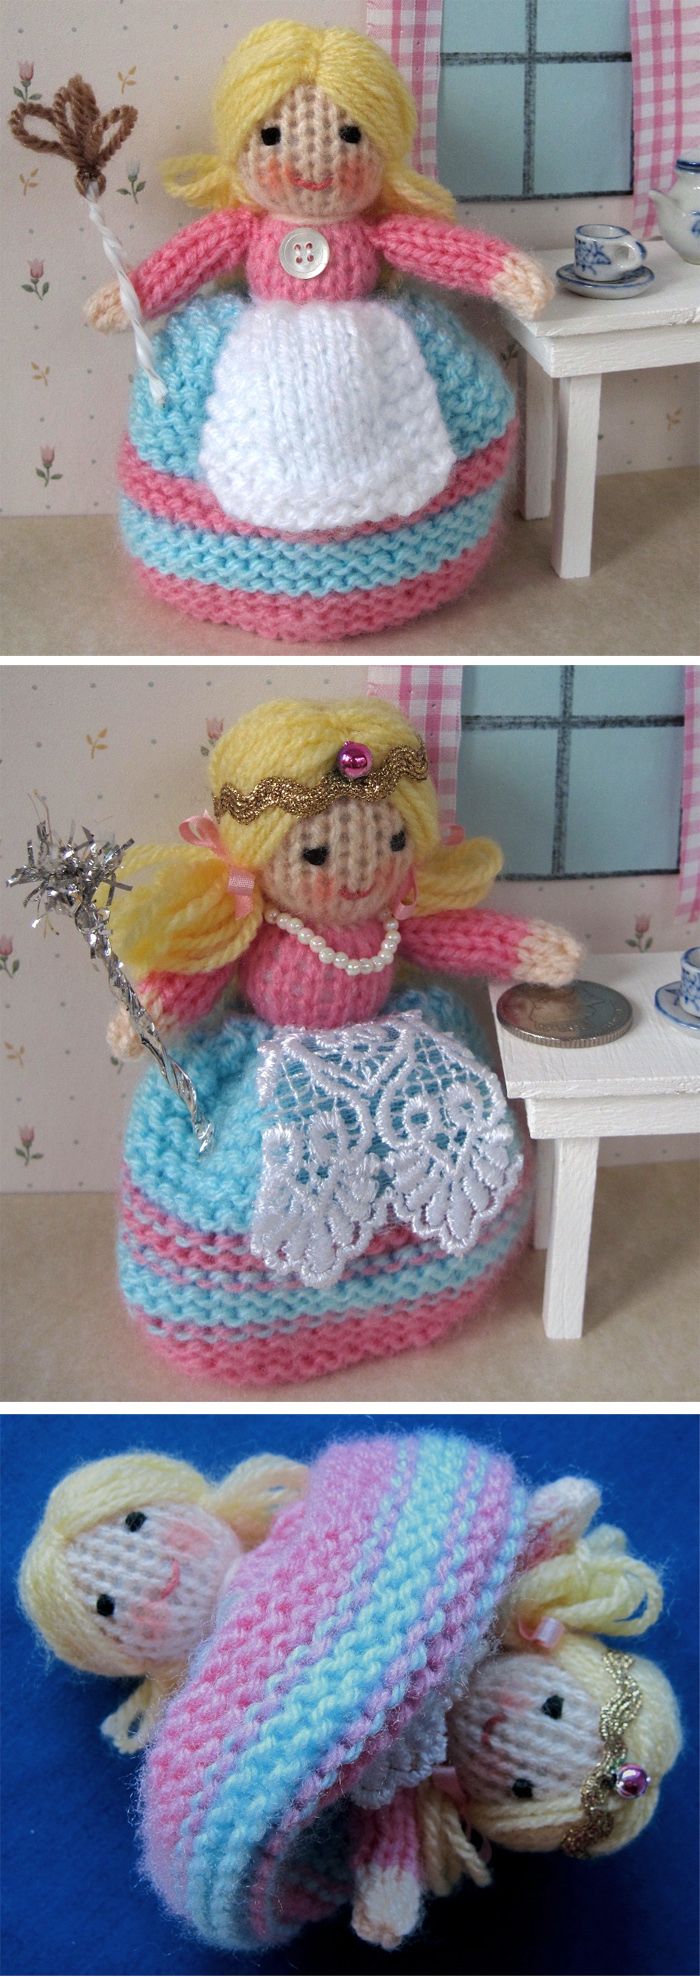 Free Knitting Patterns For Dolls Hats Fairy Tale And Storybook Knitting Patterns In The Loop Knitting